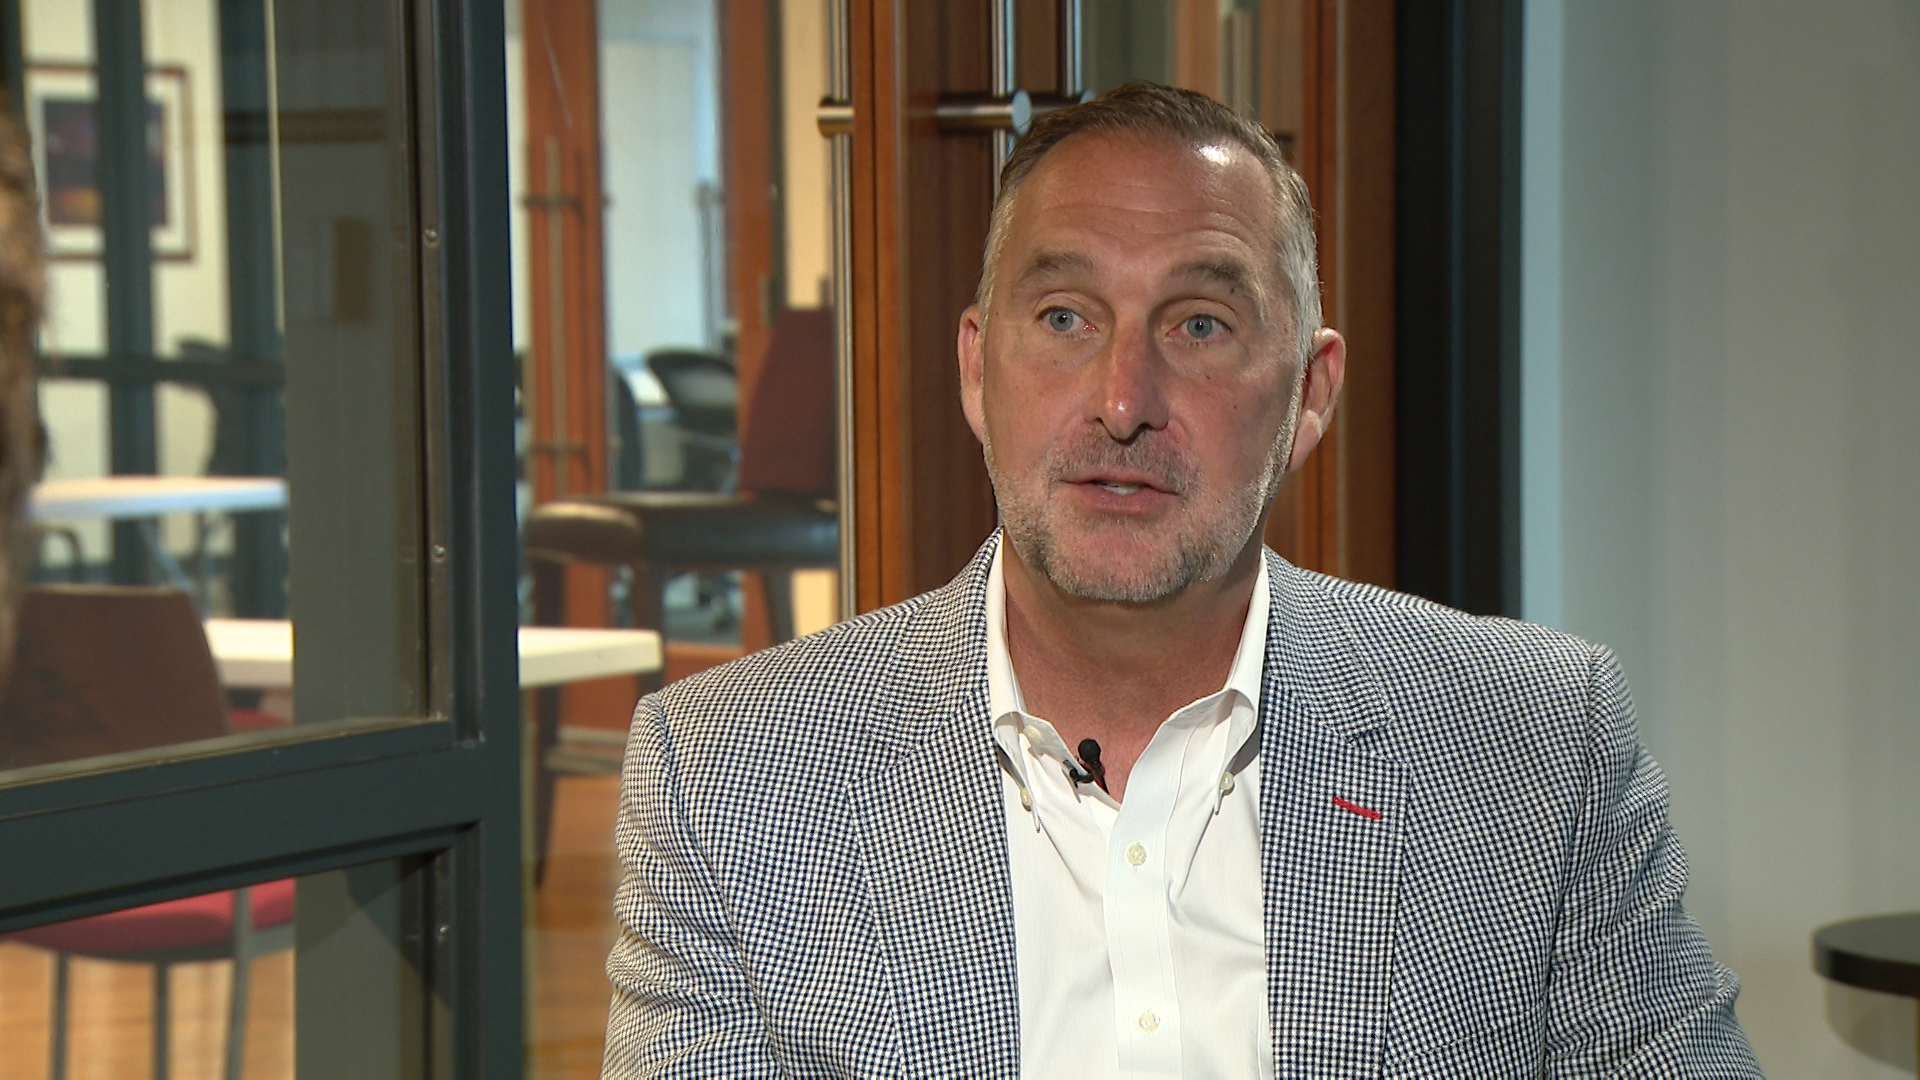 St. Louis Cardinals president John Mozeliak sat down with 5 On Your Side sports director Frank Cusumano for a wide-ranging interview on the state of the team.